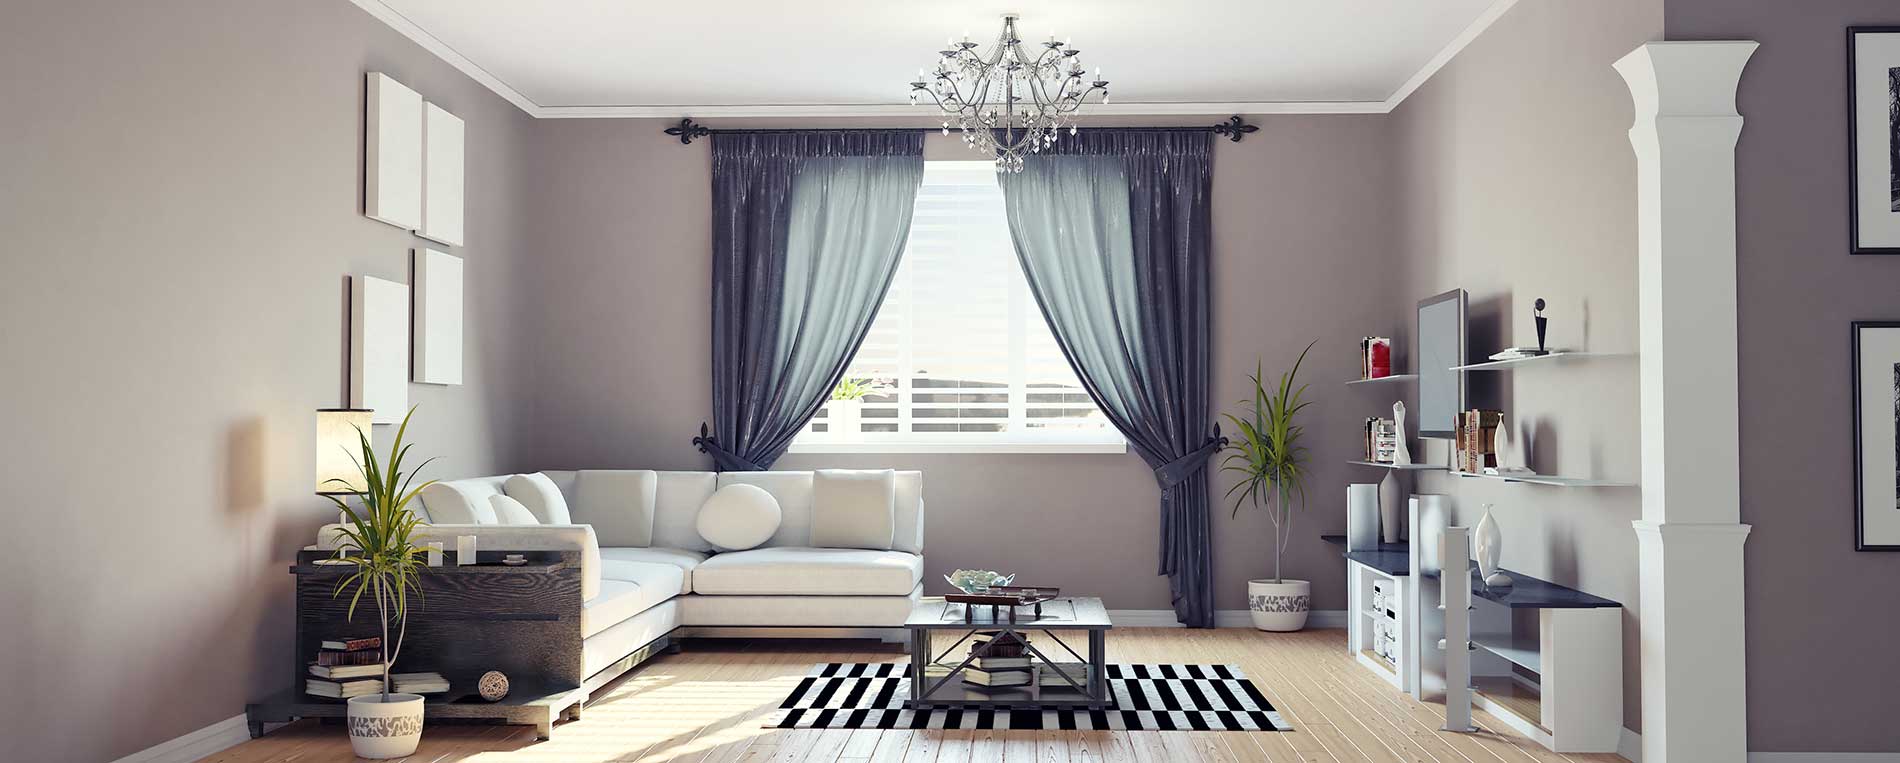 A Brief History of Window Blinds and Shades